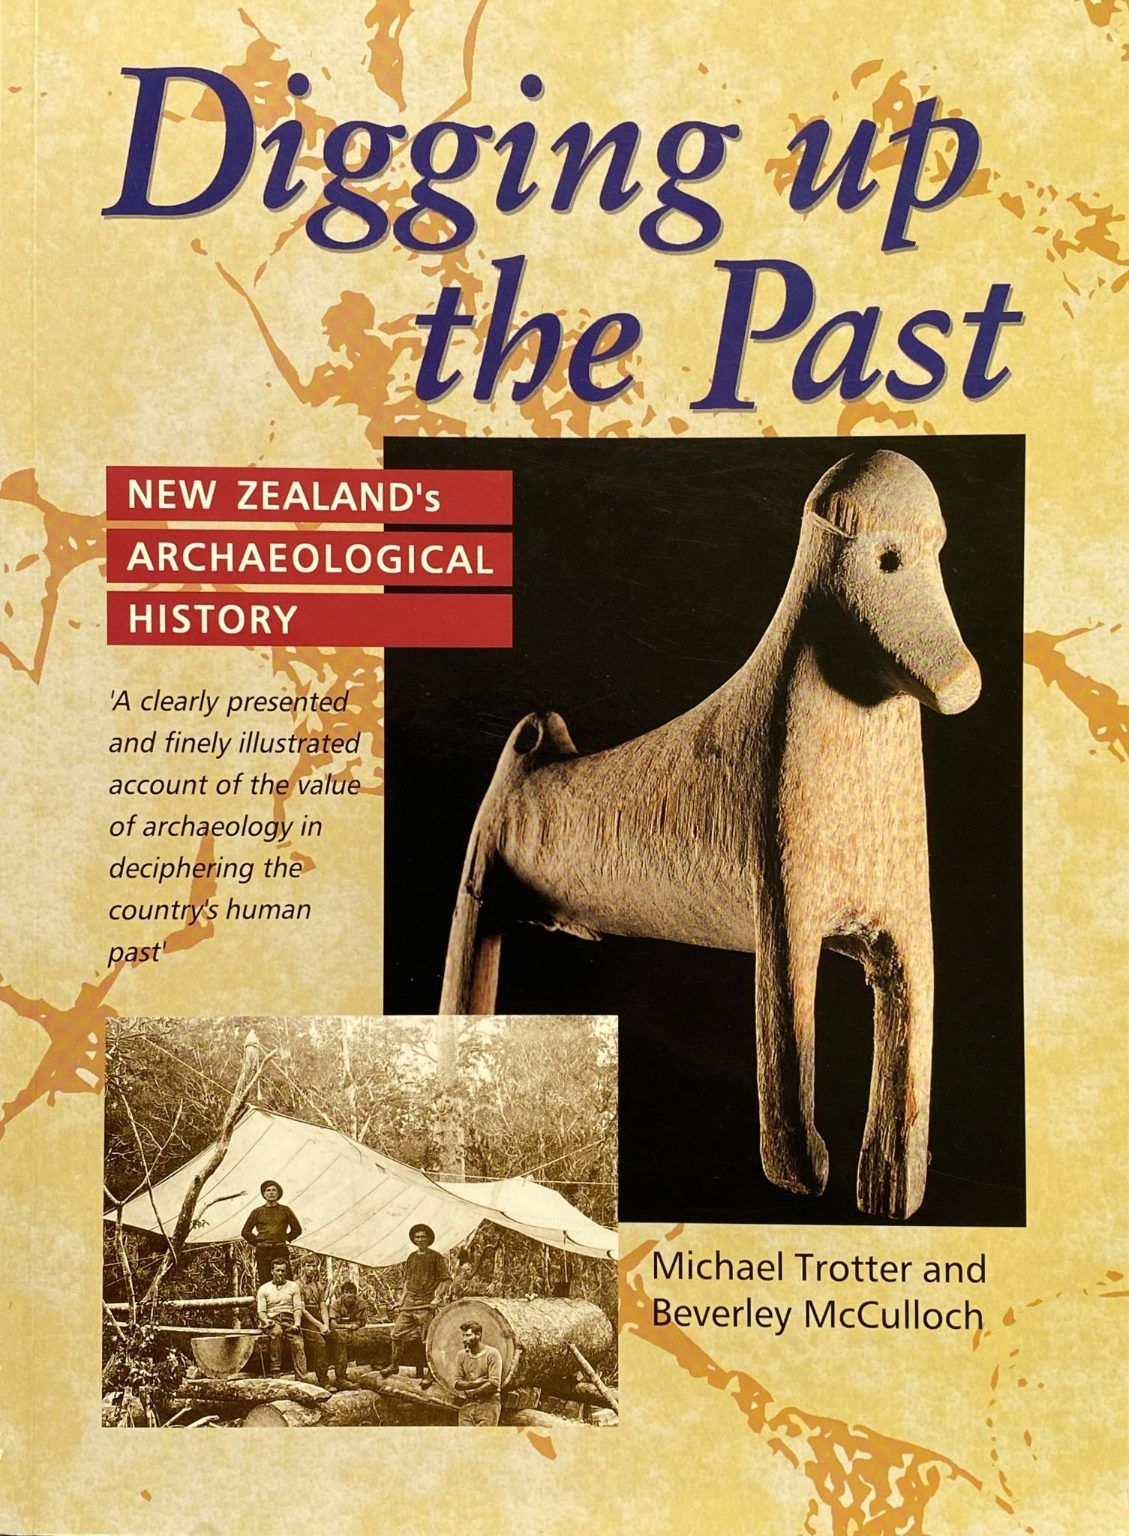 DIGGING UP THE PAST: New Zealand's Archeological History